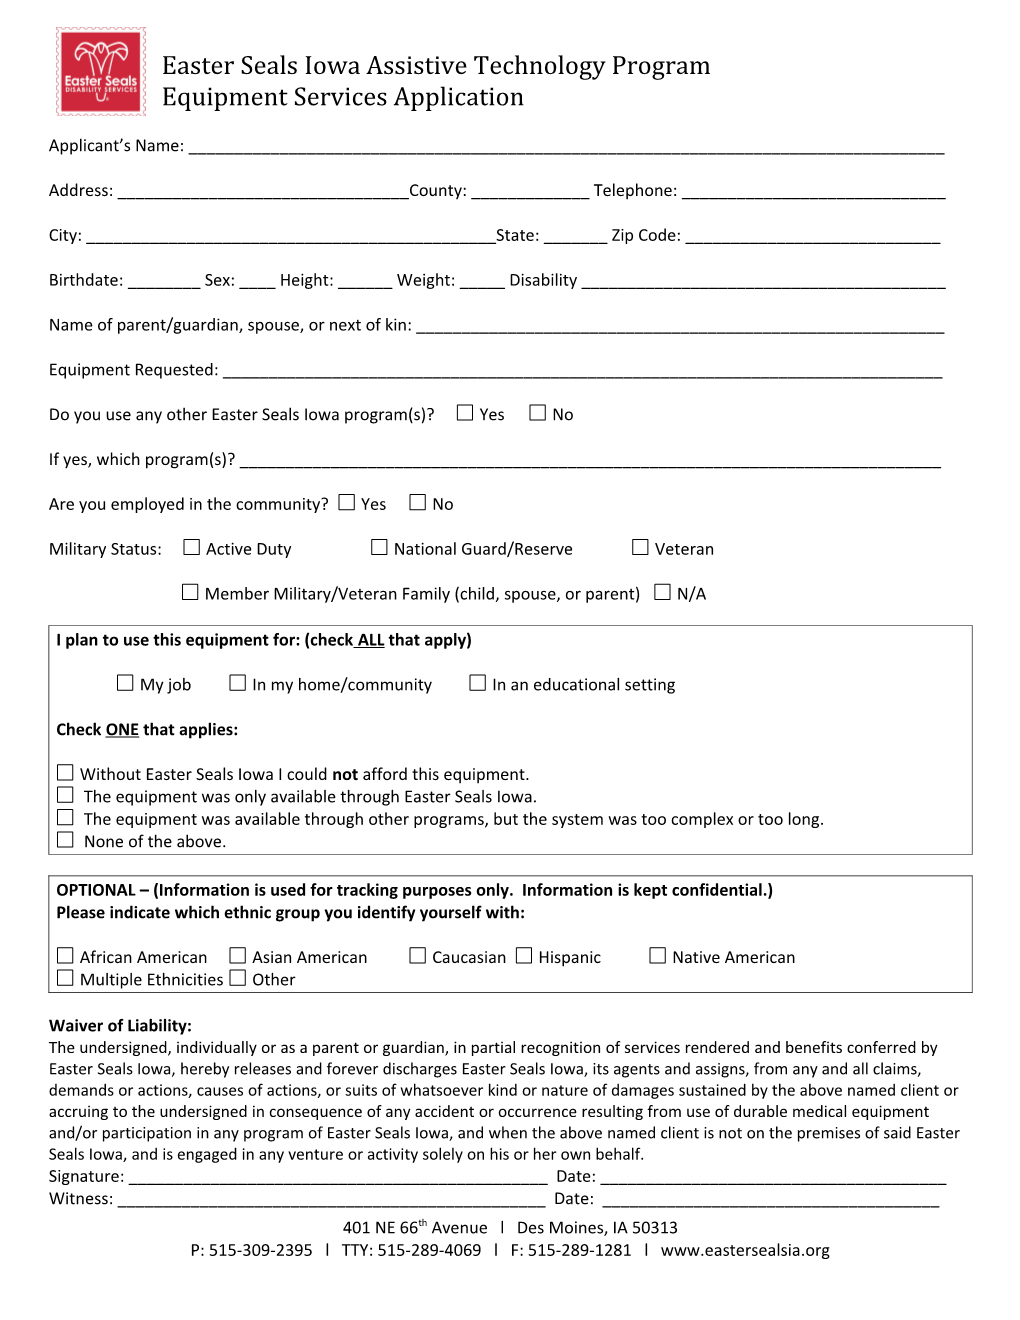 Easter Seals Equipment Services Application